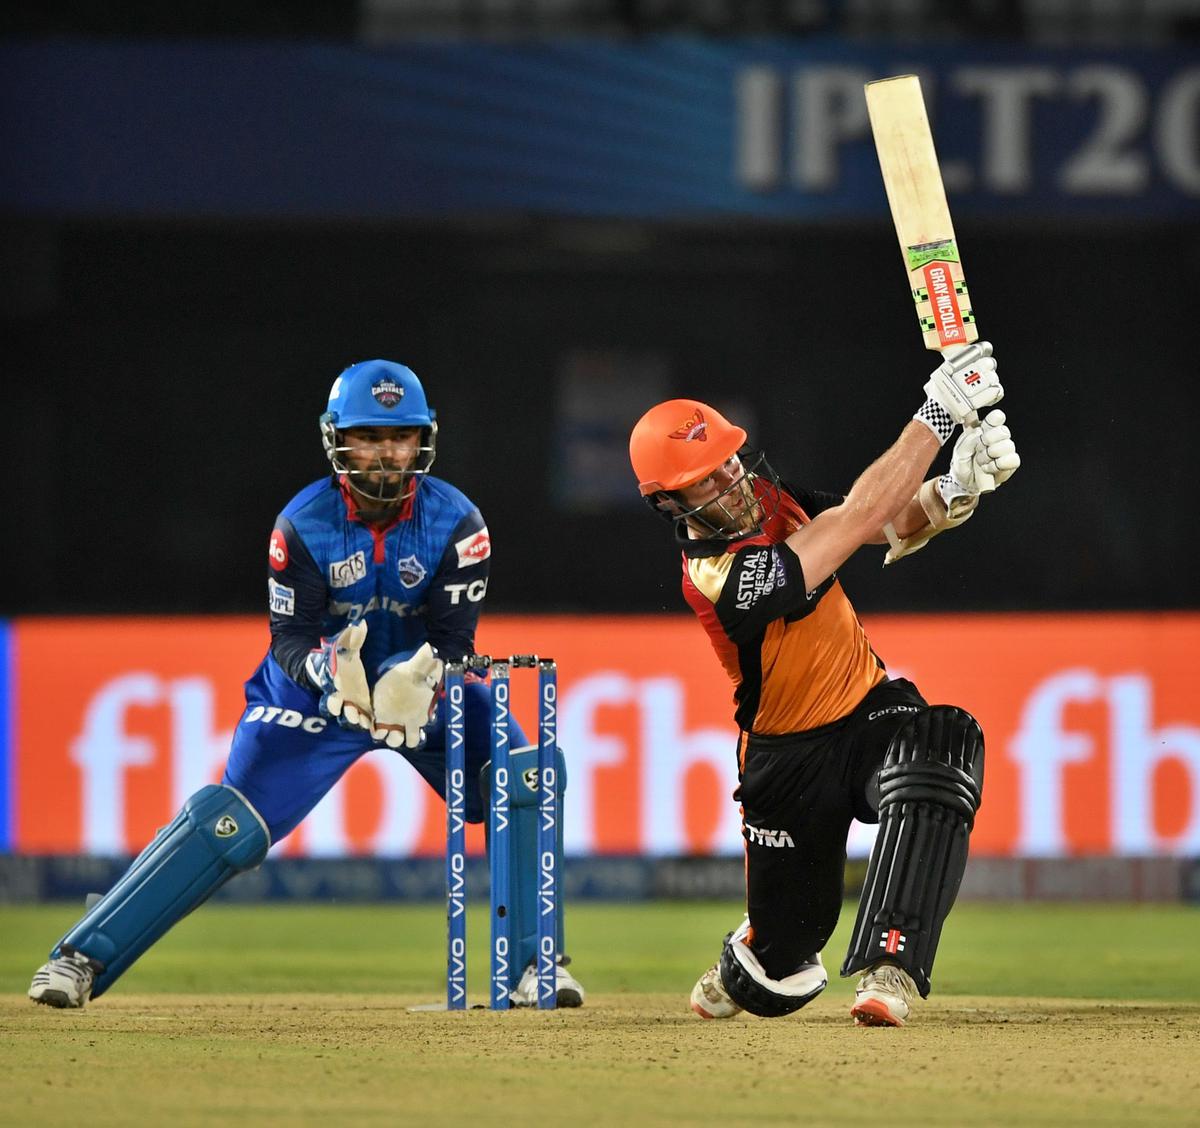 Kane Williamson in action for Sunrisers Hyderabad in the Indian Premier League.